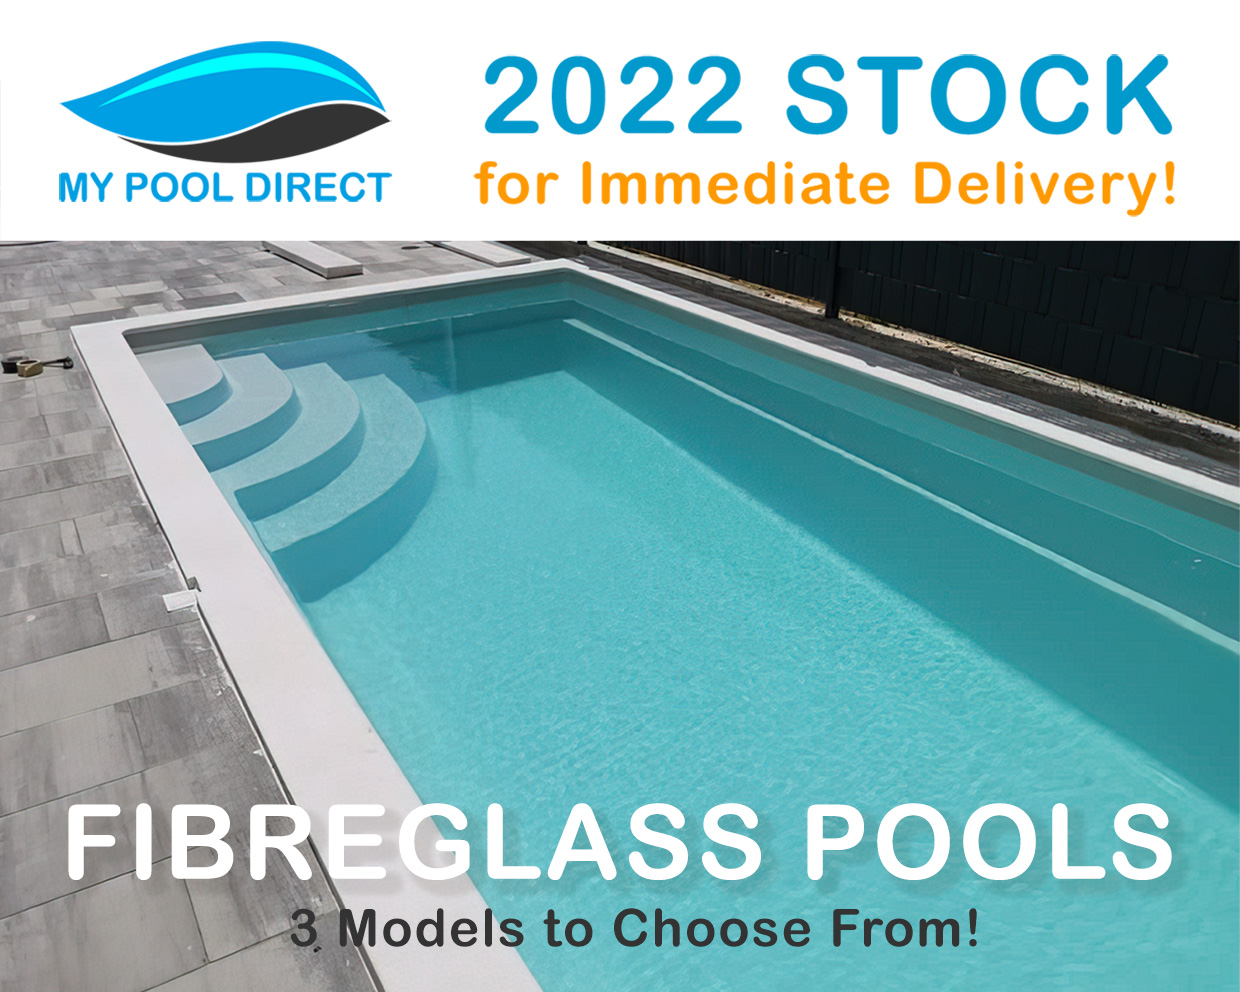 Fibreglass Pool Kits In-Stock for Immediate Purchase